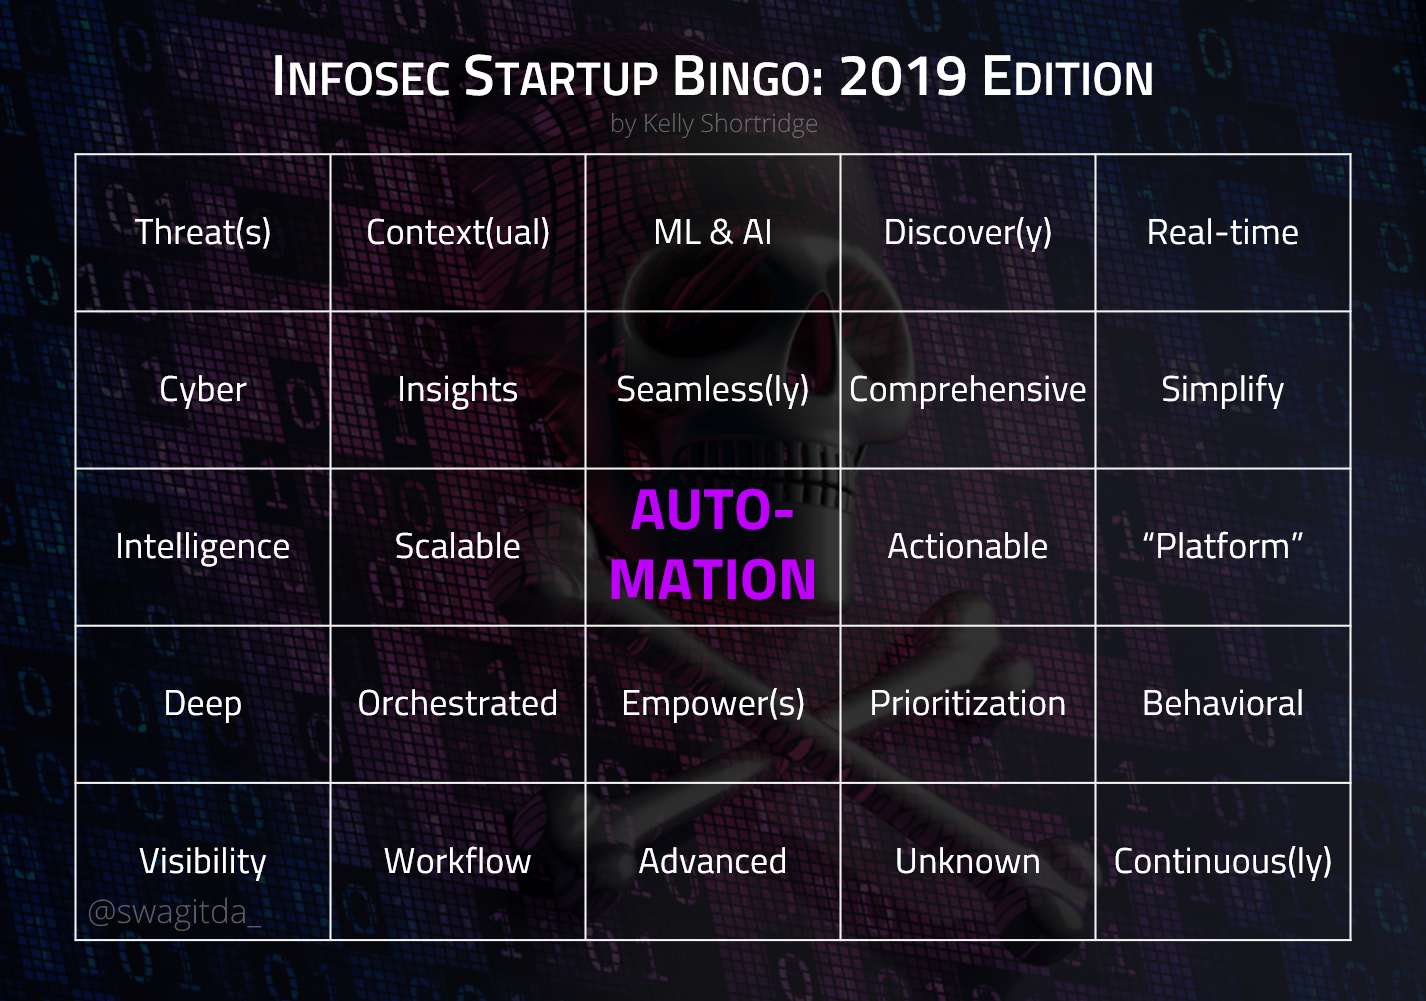 Infosec Startup Buzzword Bingo card for 2019. The buzzwords, from top left to bottom right, include: Threat. Context. Machine Learning and AI. Discover. Real-time. Cyber. Insights. Seamless. Comprehensive. Simplify. Intelligence. Scalable. Automation (the center square). Actionable. Platform. Deep. Orchestrated. Empower. Prioritization. Behavioral. Visibility. Workflow. Advanced. Unknown. Continuous.